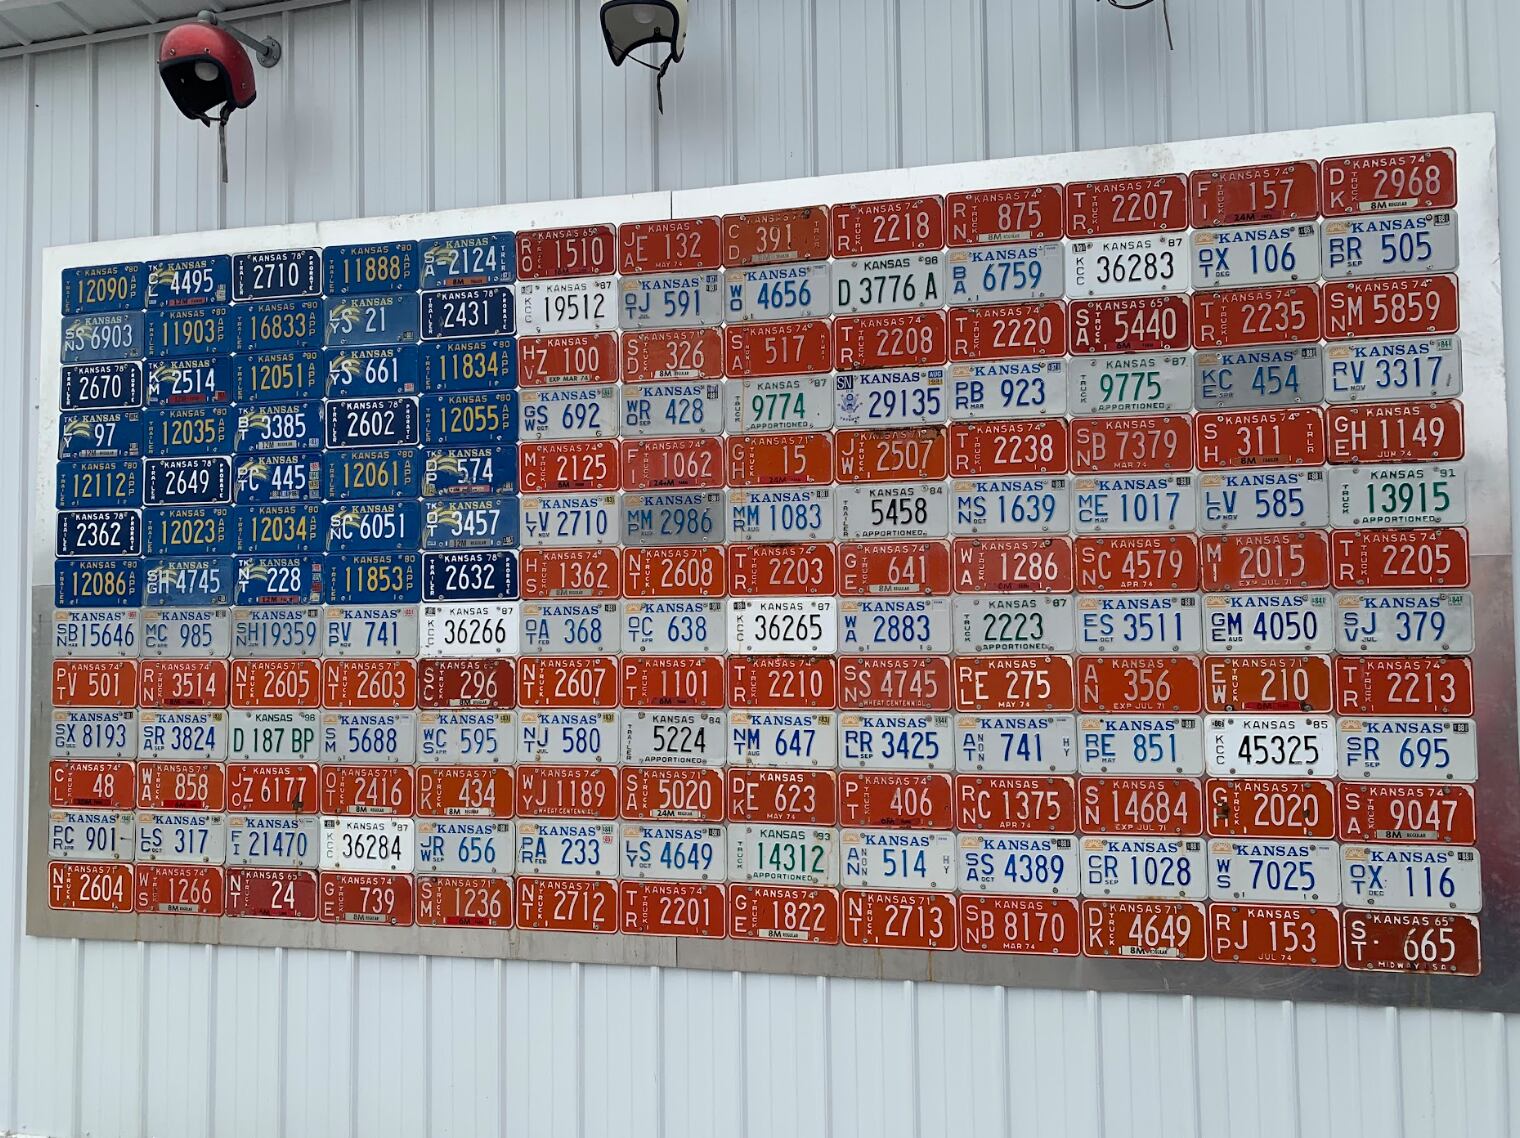 Folk art made from reused license plates depicts the American flag.